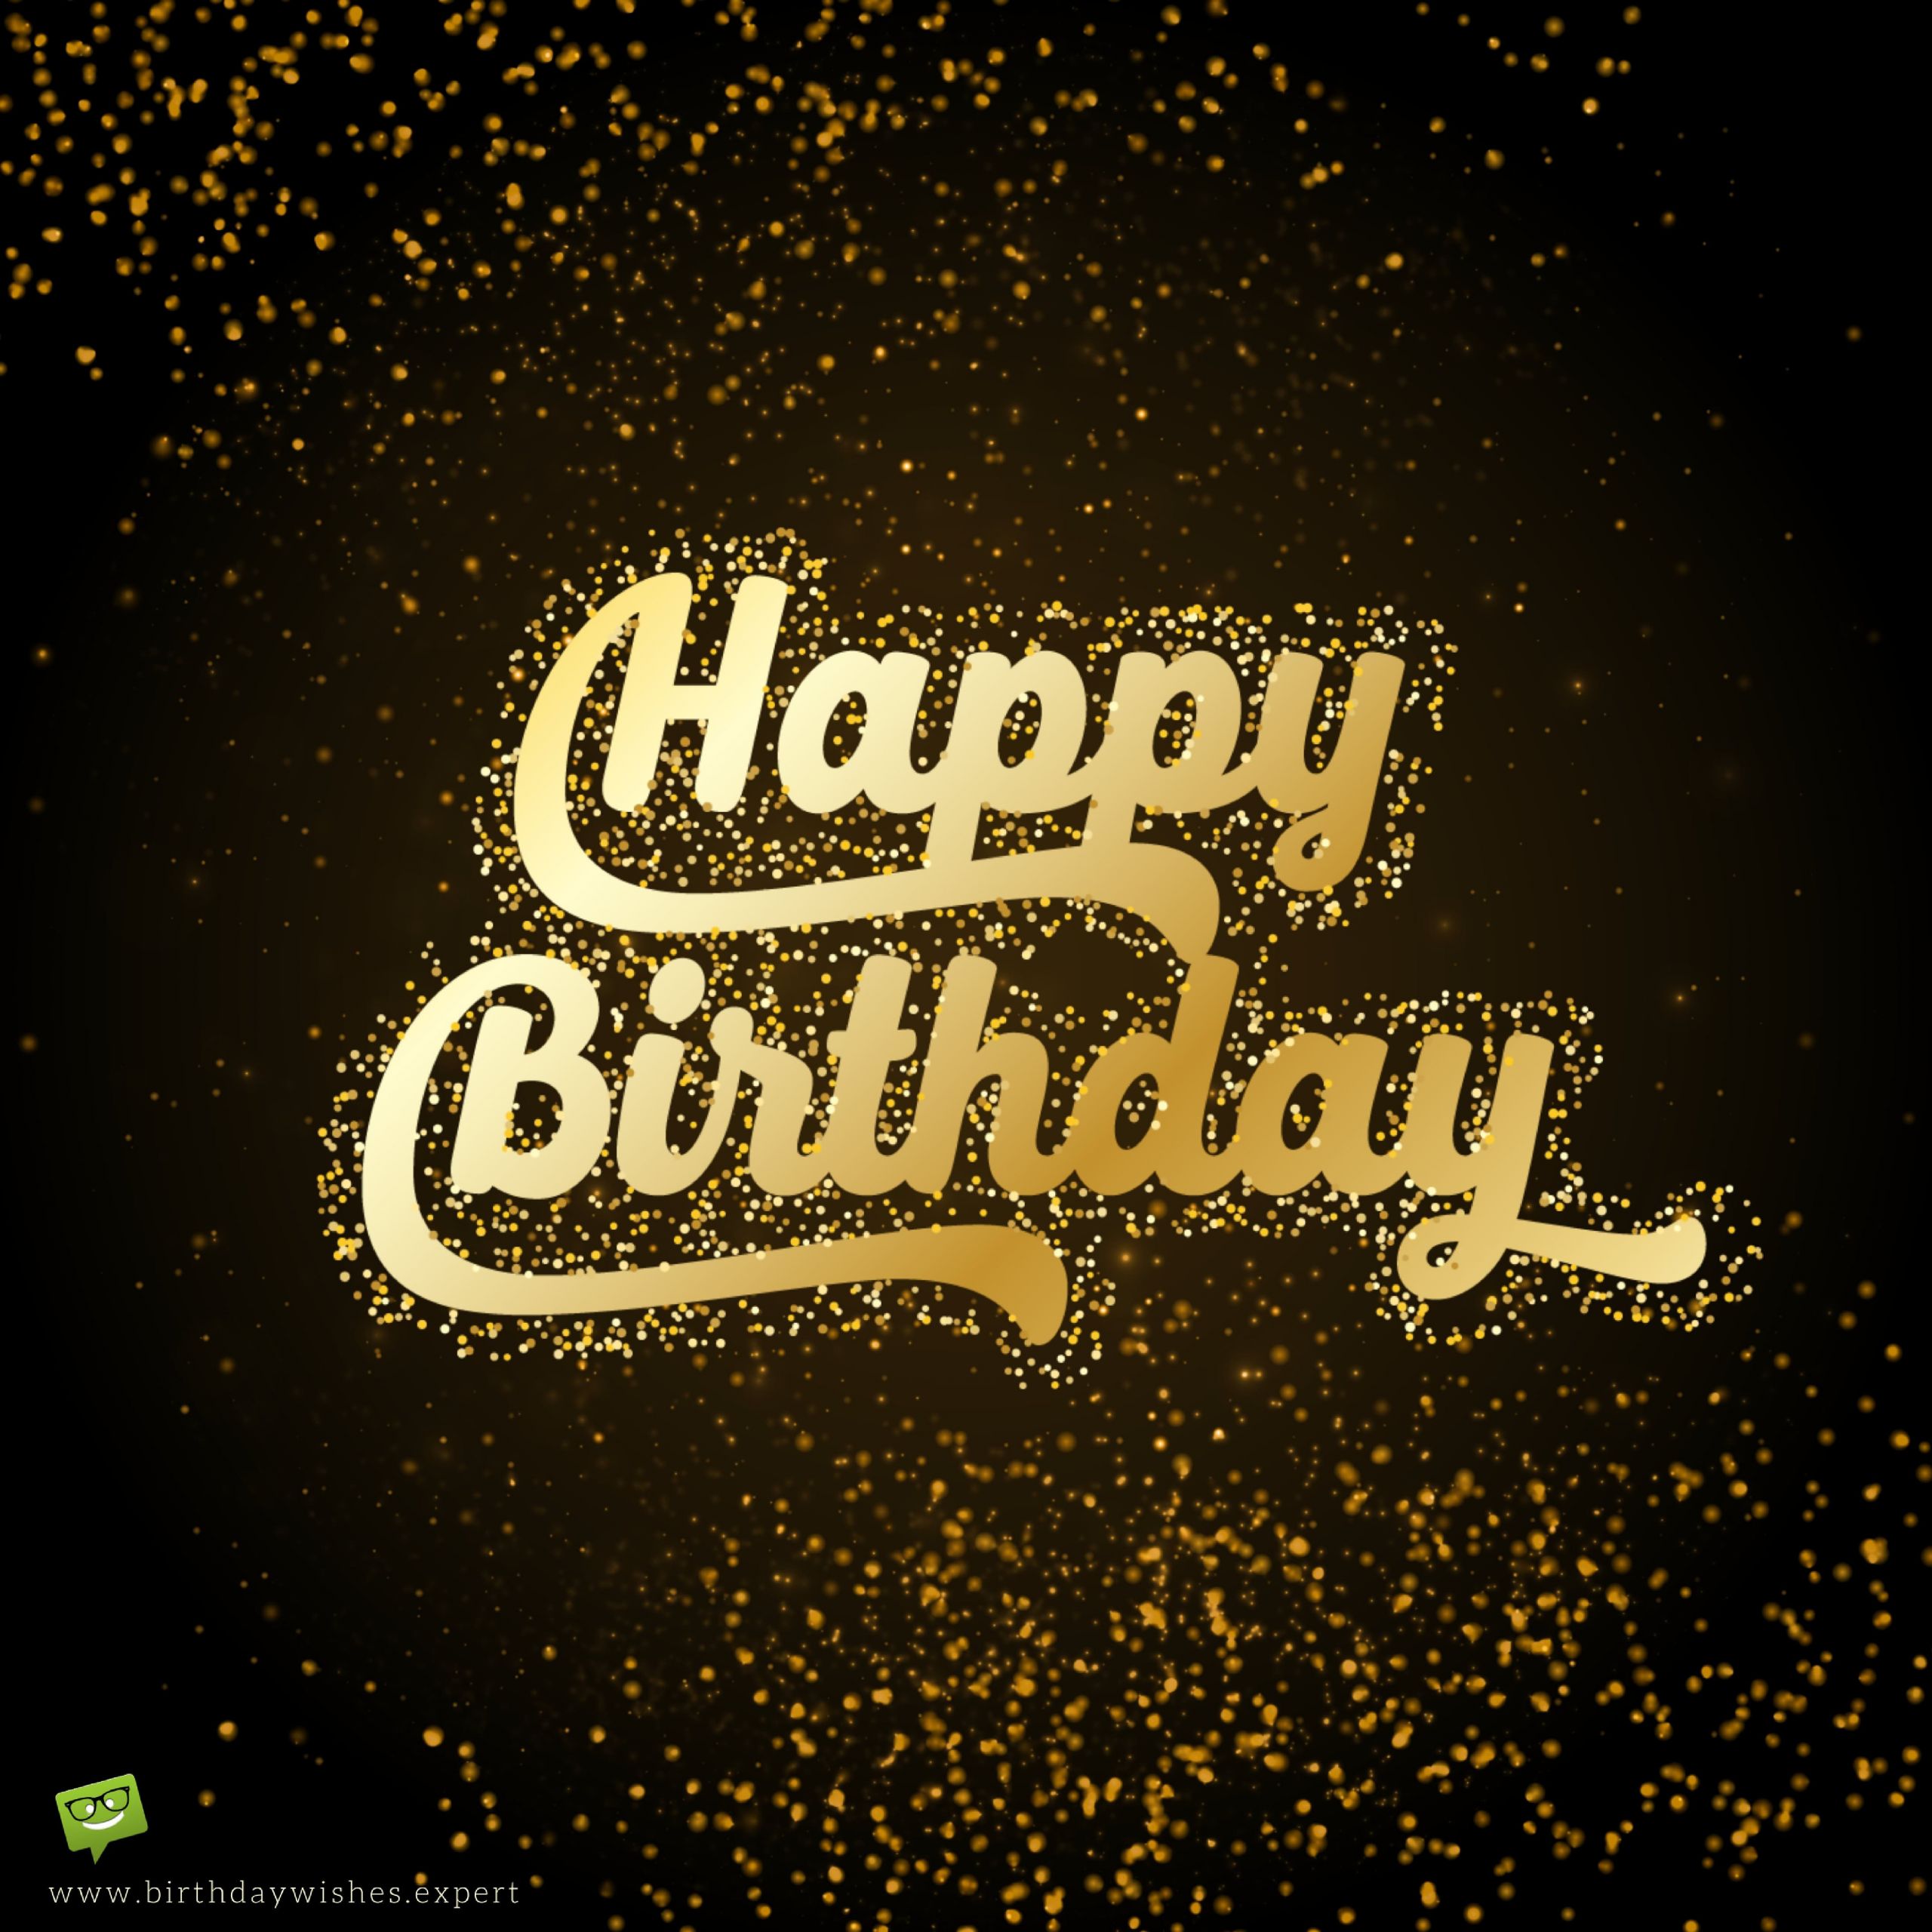 Birthday Wishes For A Guy Friend
 200 Free Birthday eCards for Friends and Family